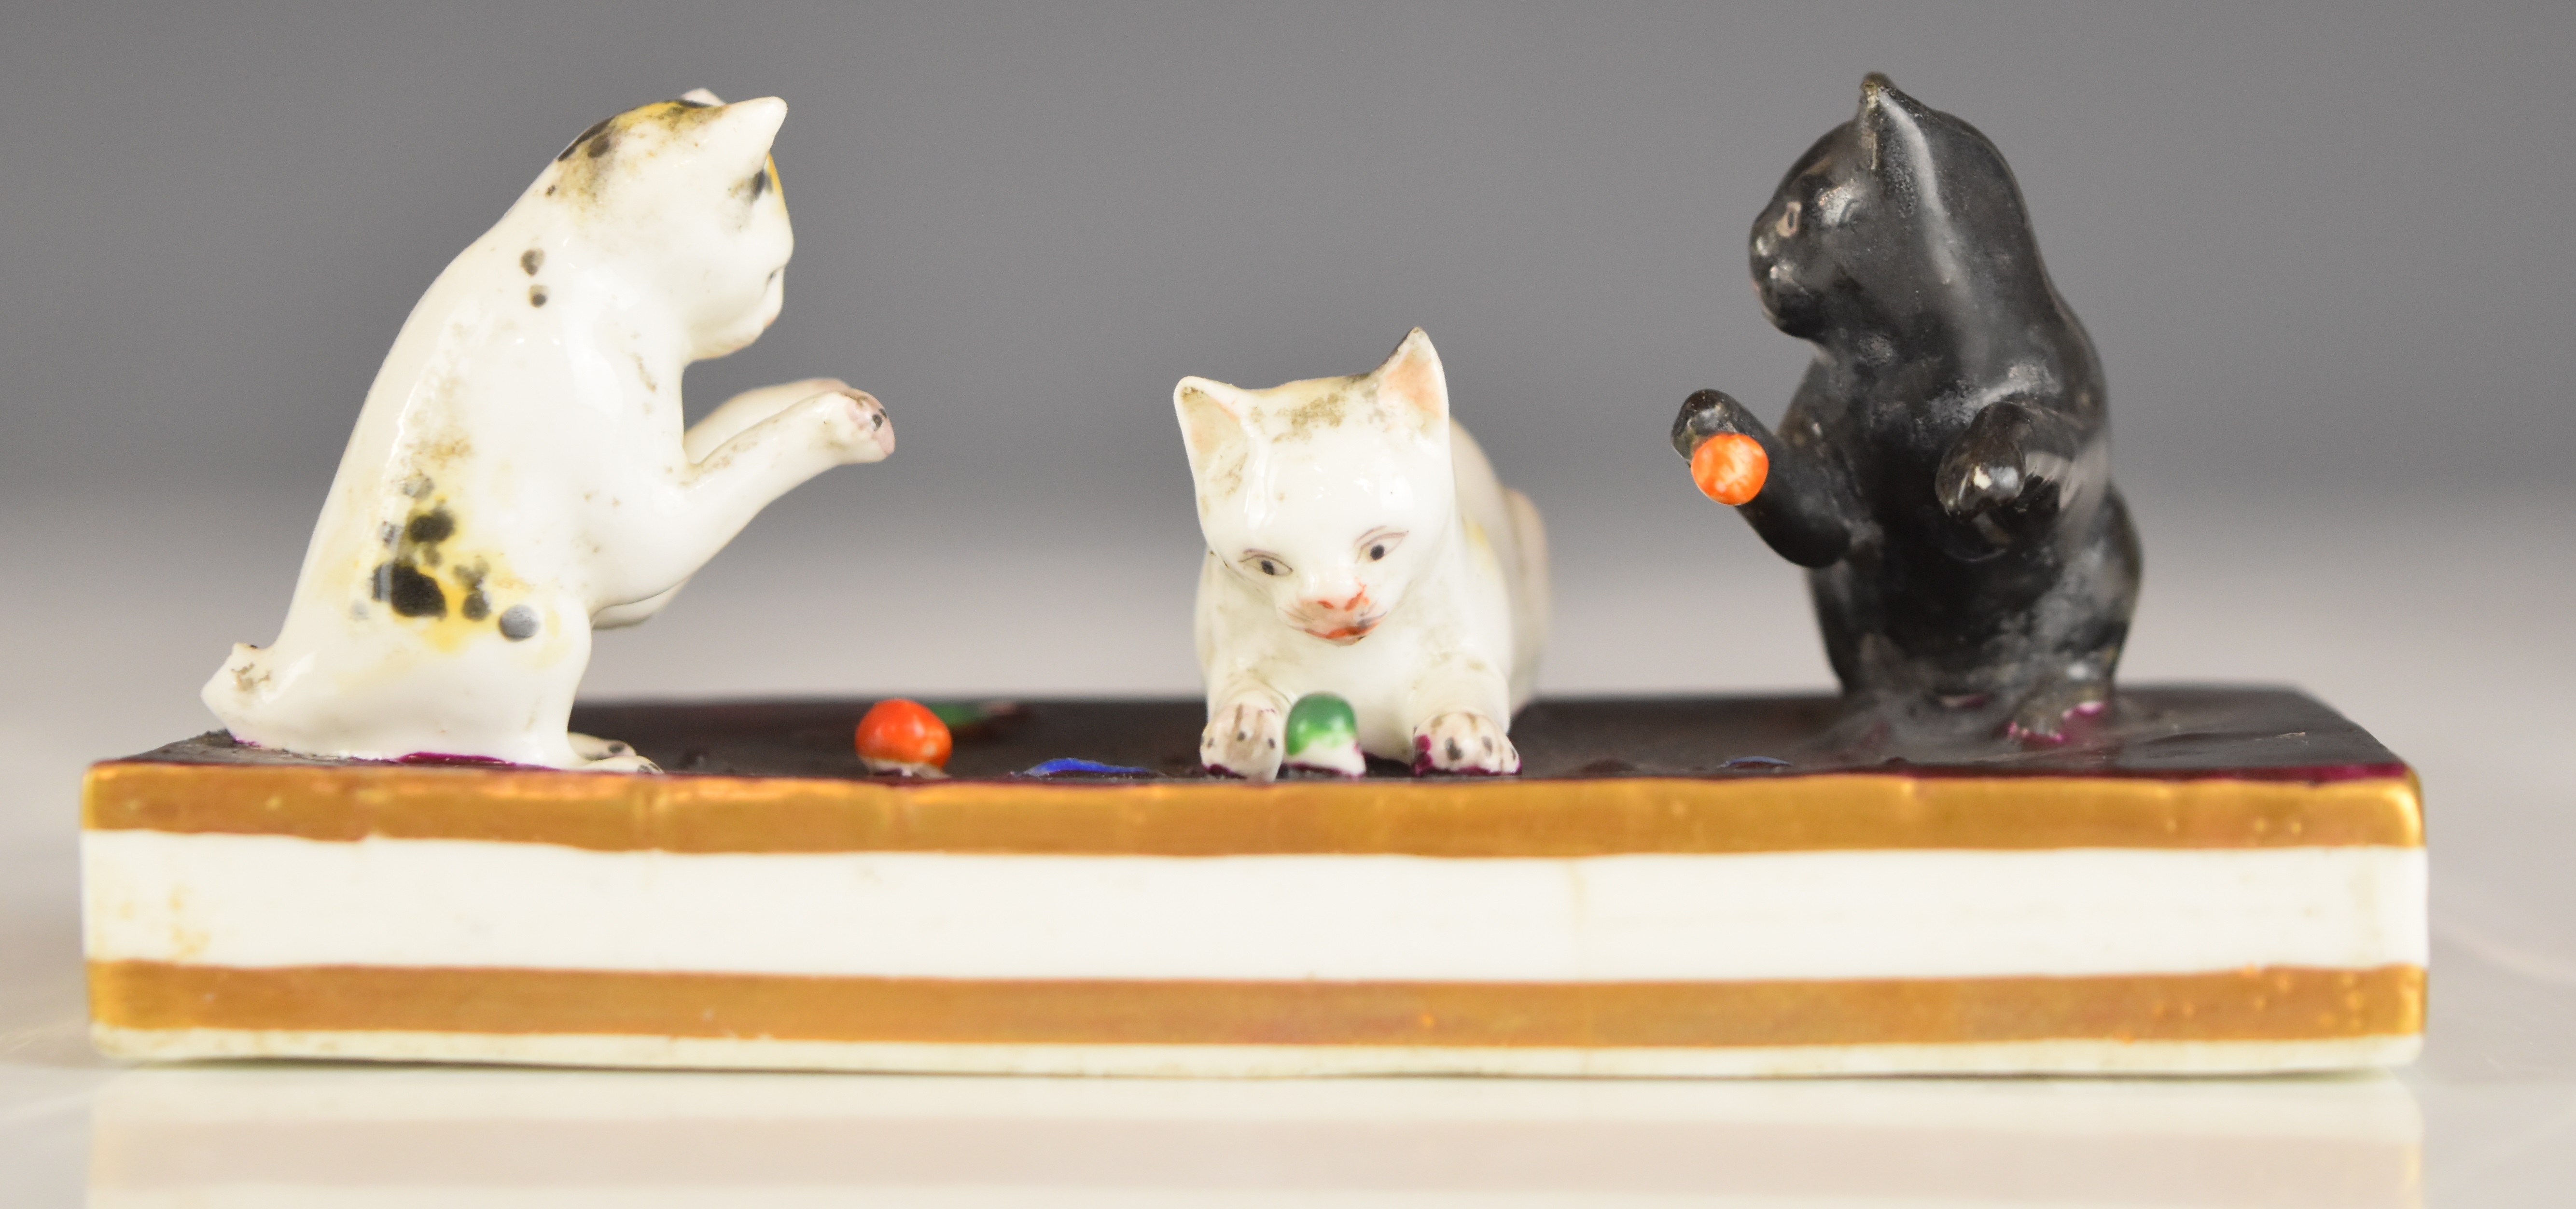 19thC novelty miniature porcelain tableau of three kittens playing, W10 x D4.5 x H4.5cm - Image 5 of 8